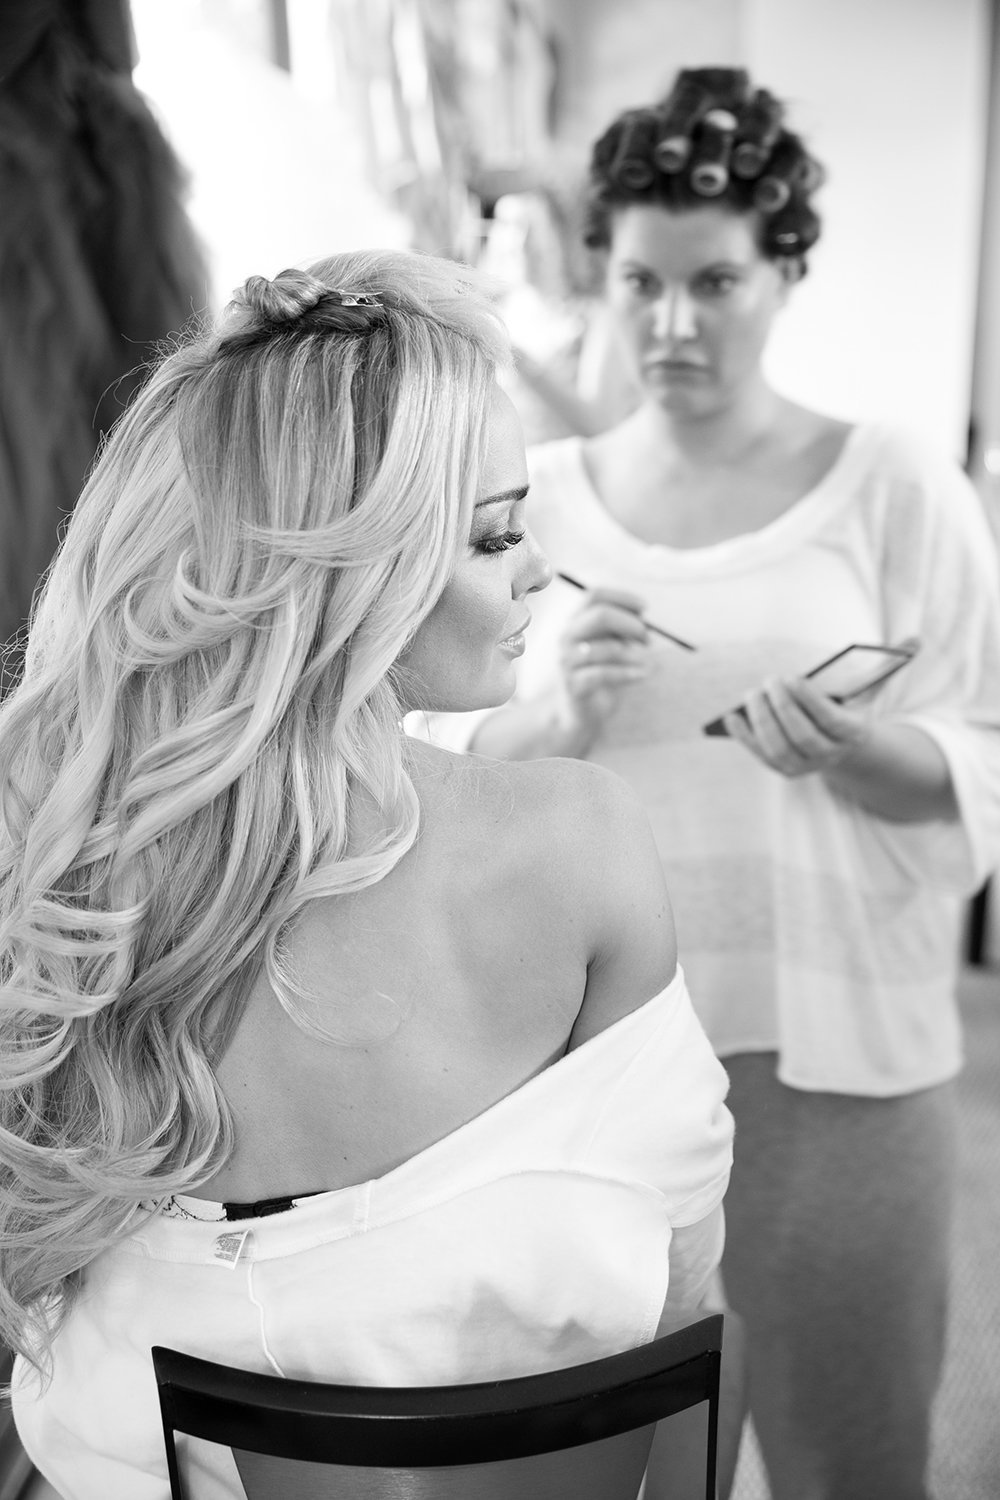 Lovely black and white moment while bride is getting ready